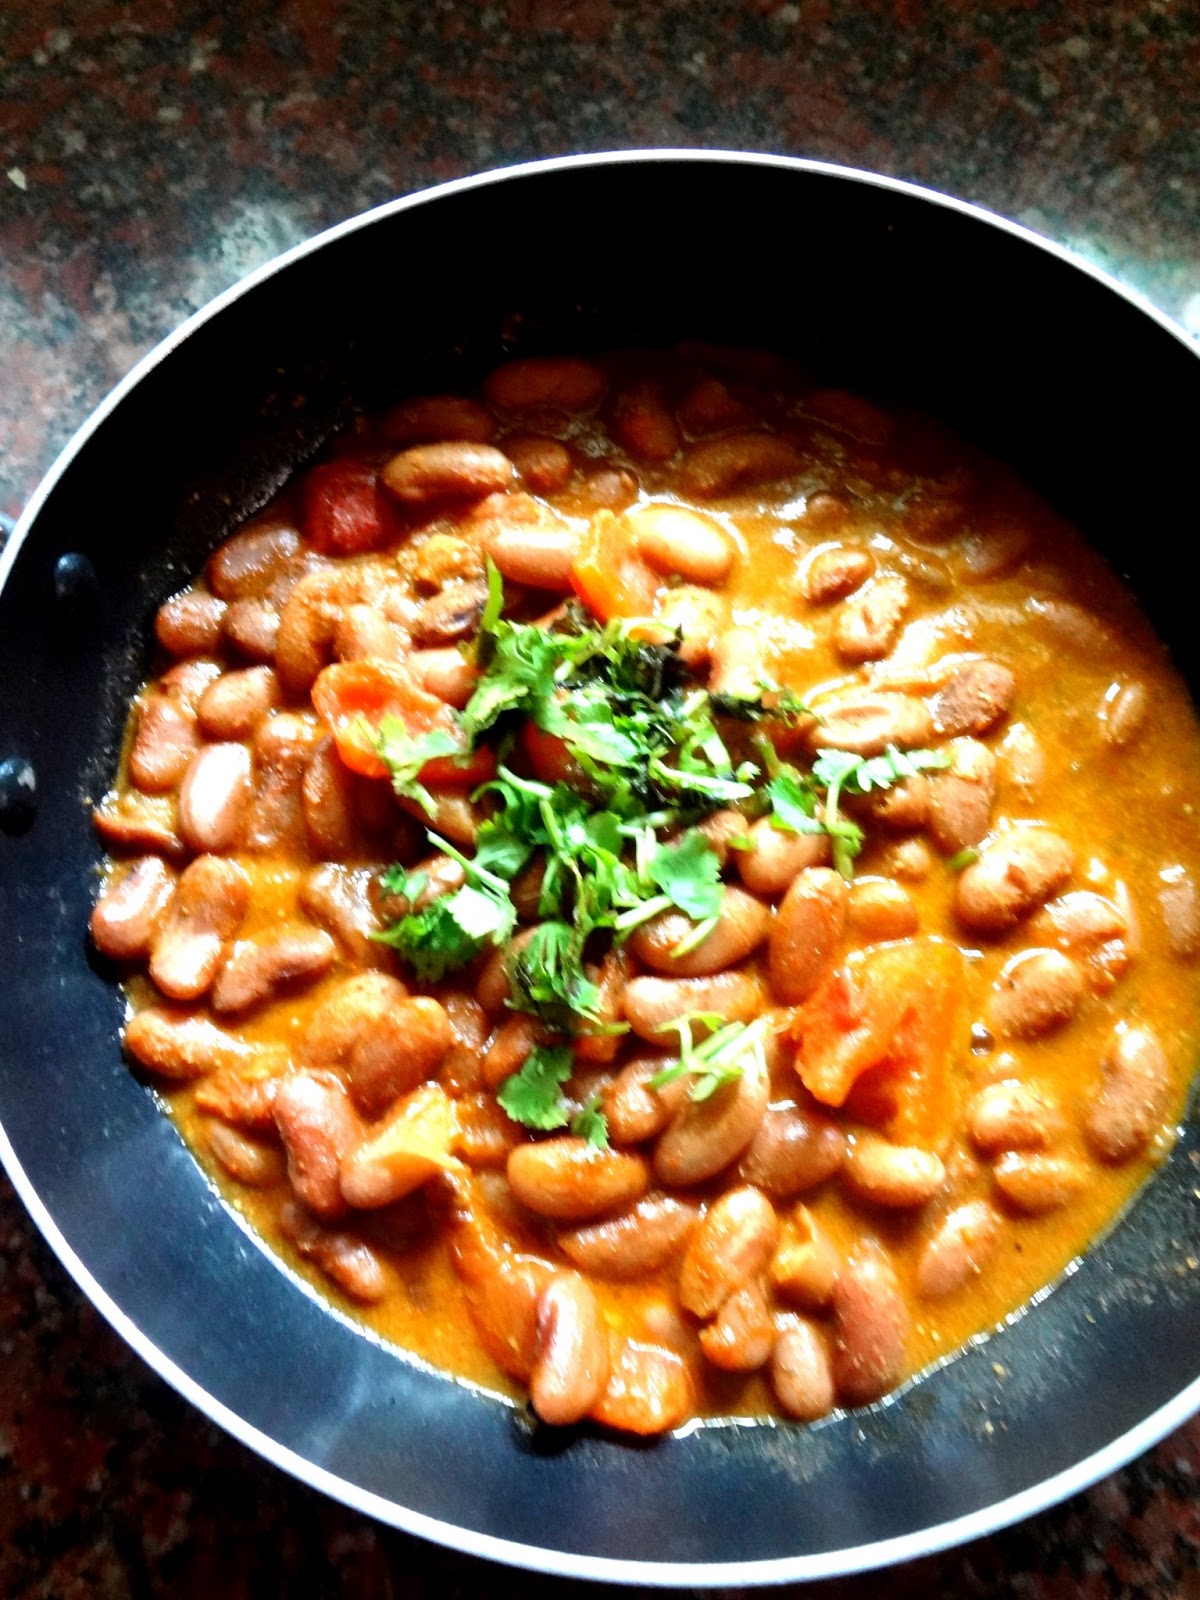 Your Everyday Cook: Red Kidney Beans in a thick gravy ( Rajma Masala)